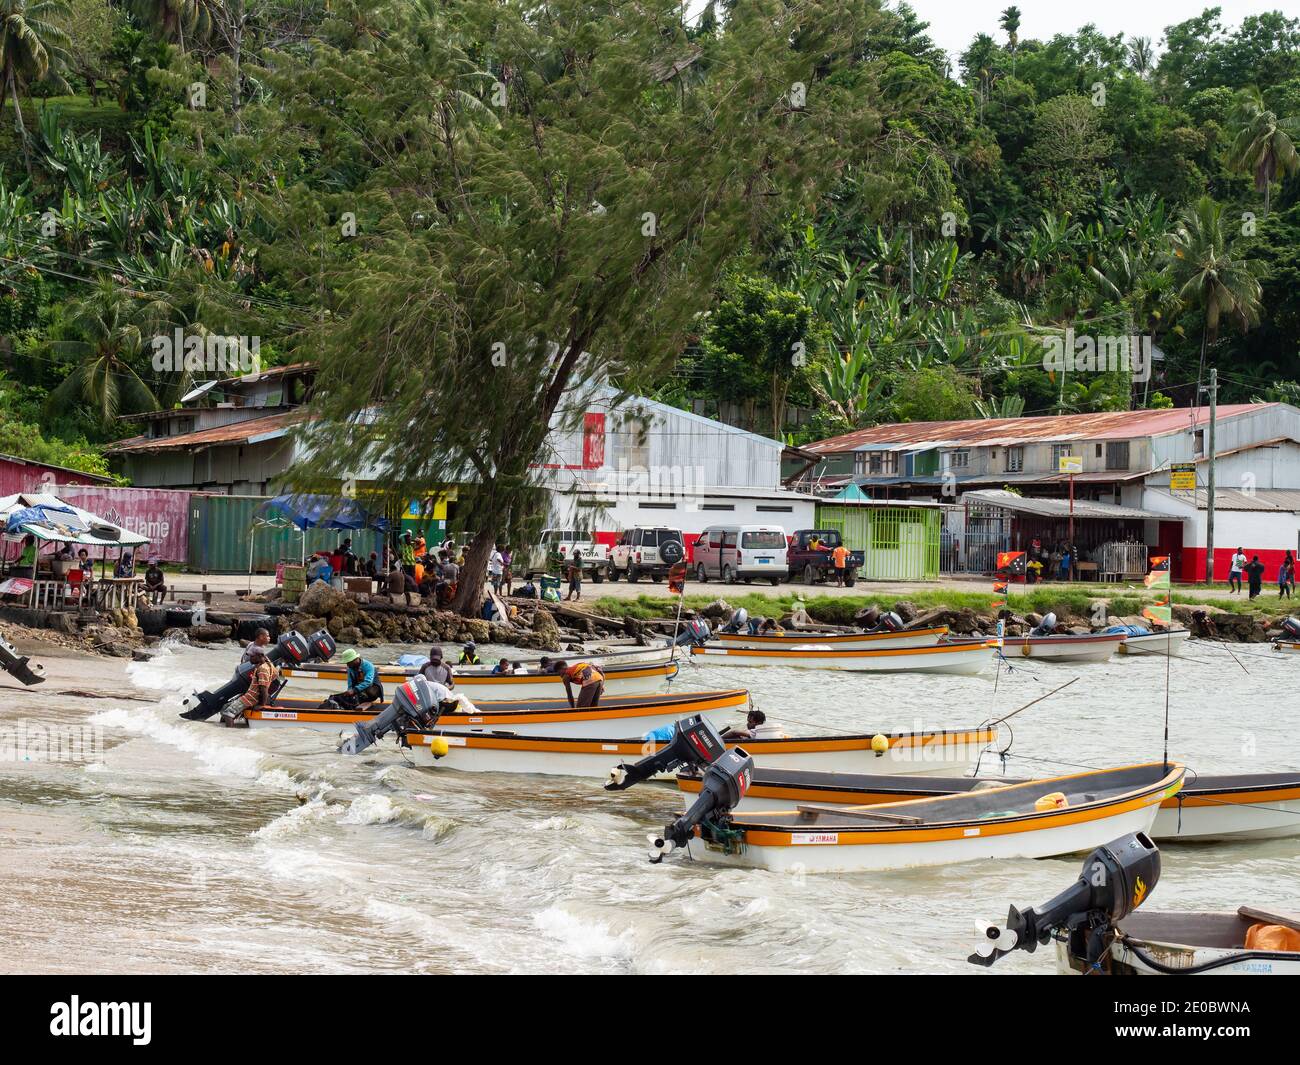 Passenger ferries waiting for passengers in Wewak, the capital of the East Sepik province of Papua New Guinea. These dinghies are used for public tran Stock Photo